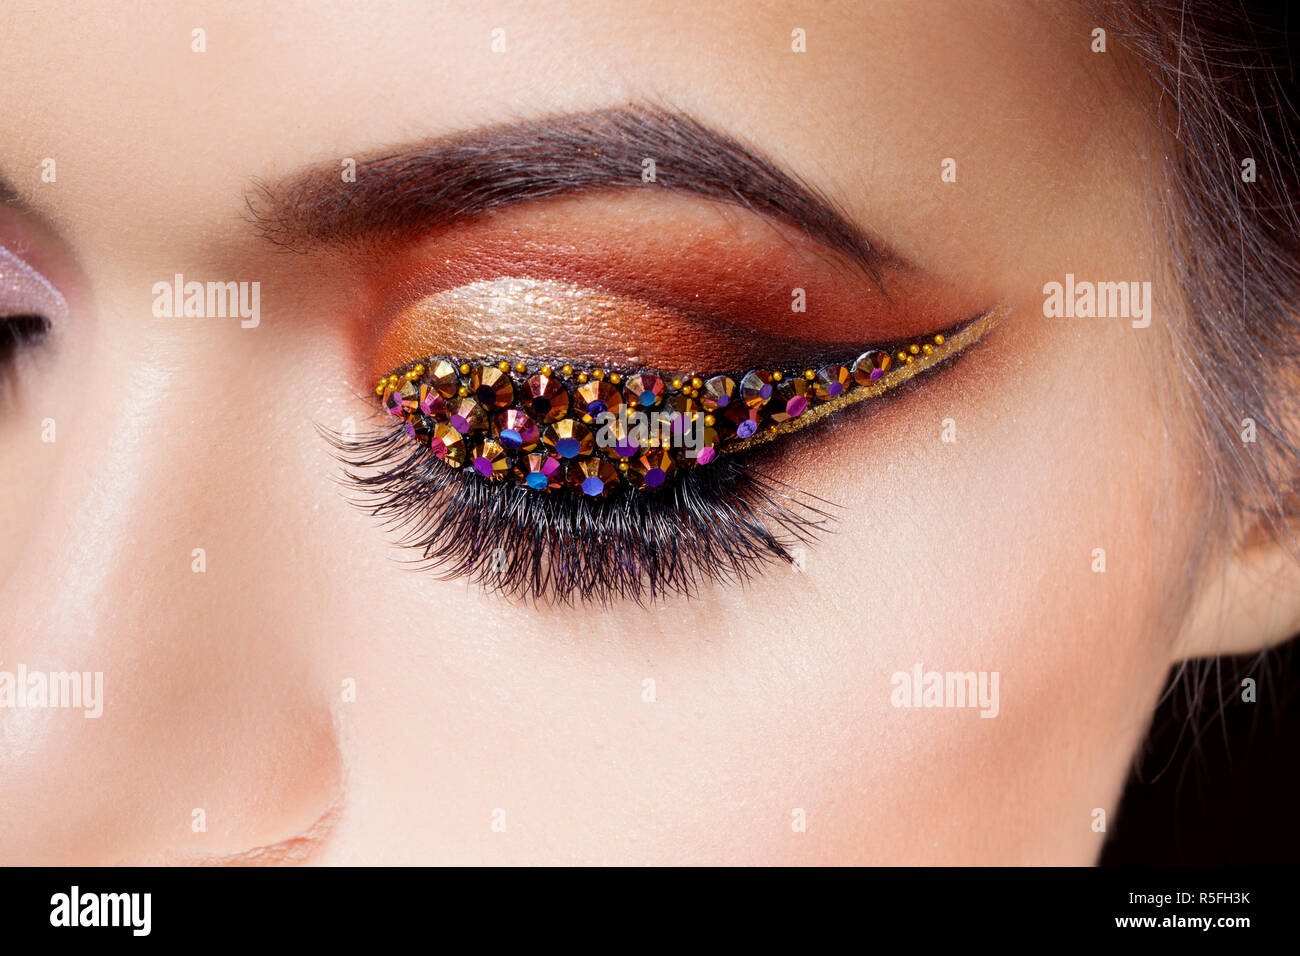 Amazing Bright eye makeup with a arrow with rhinestones. Brown and gold tones, colored eyeshadow. Close up. Stock Photo